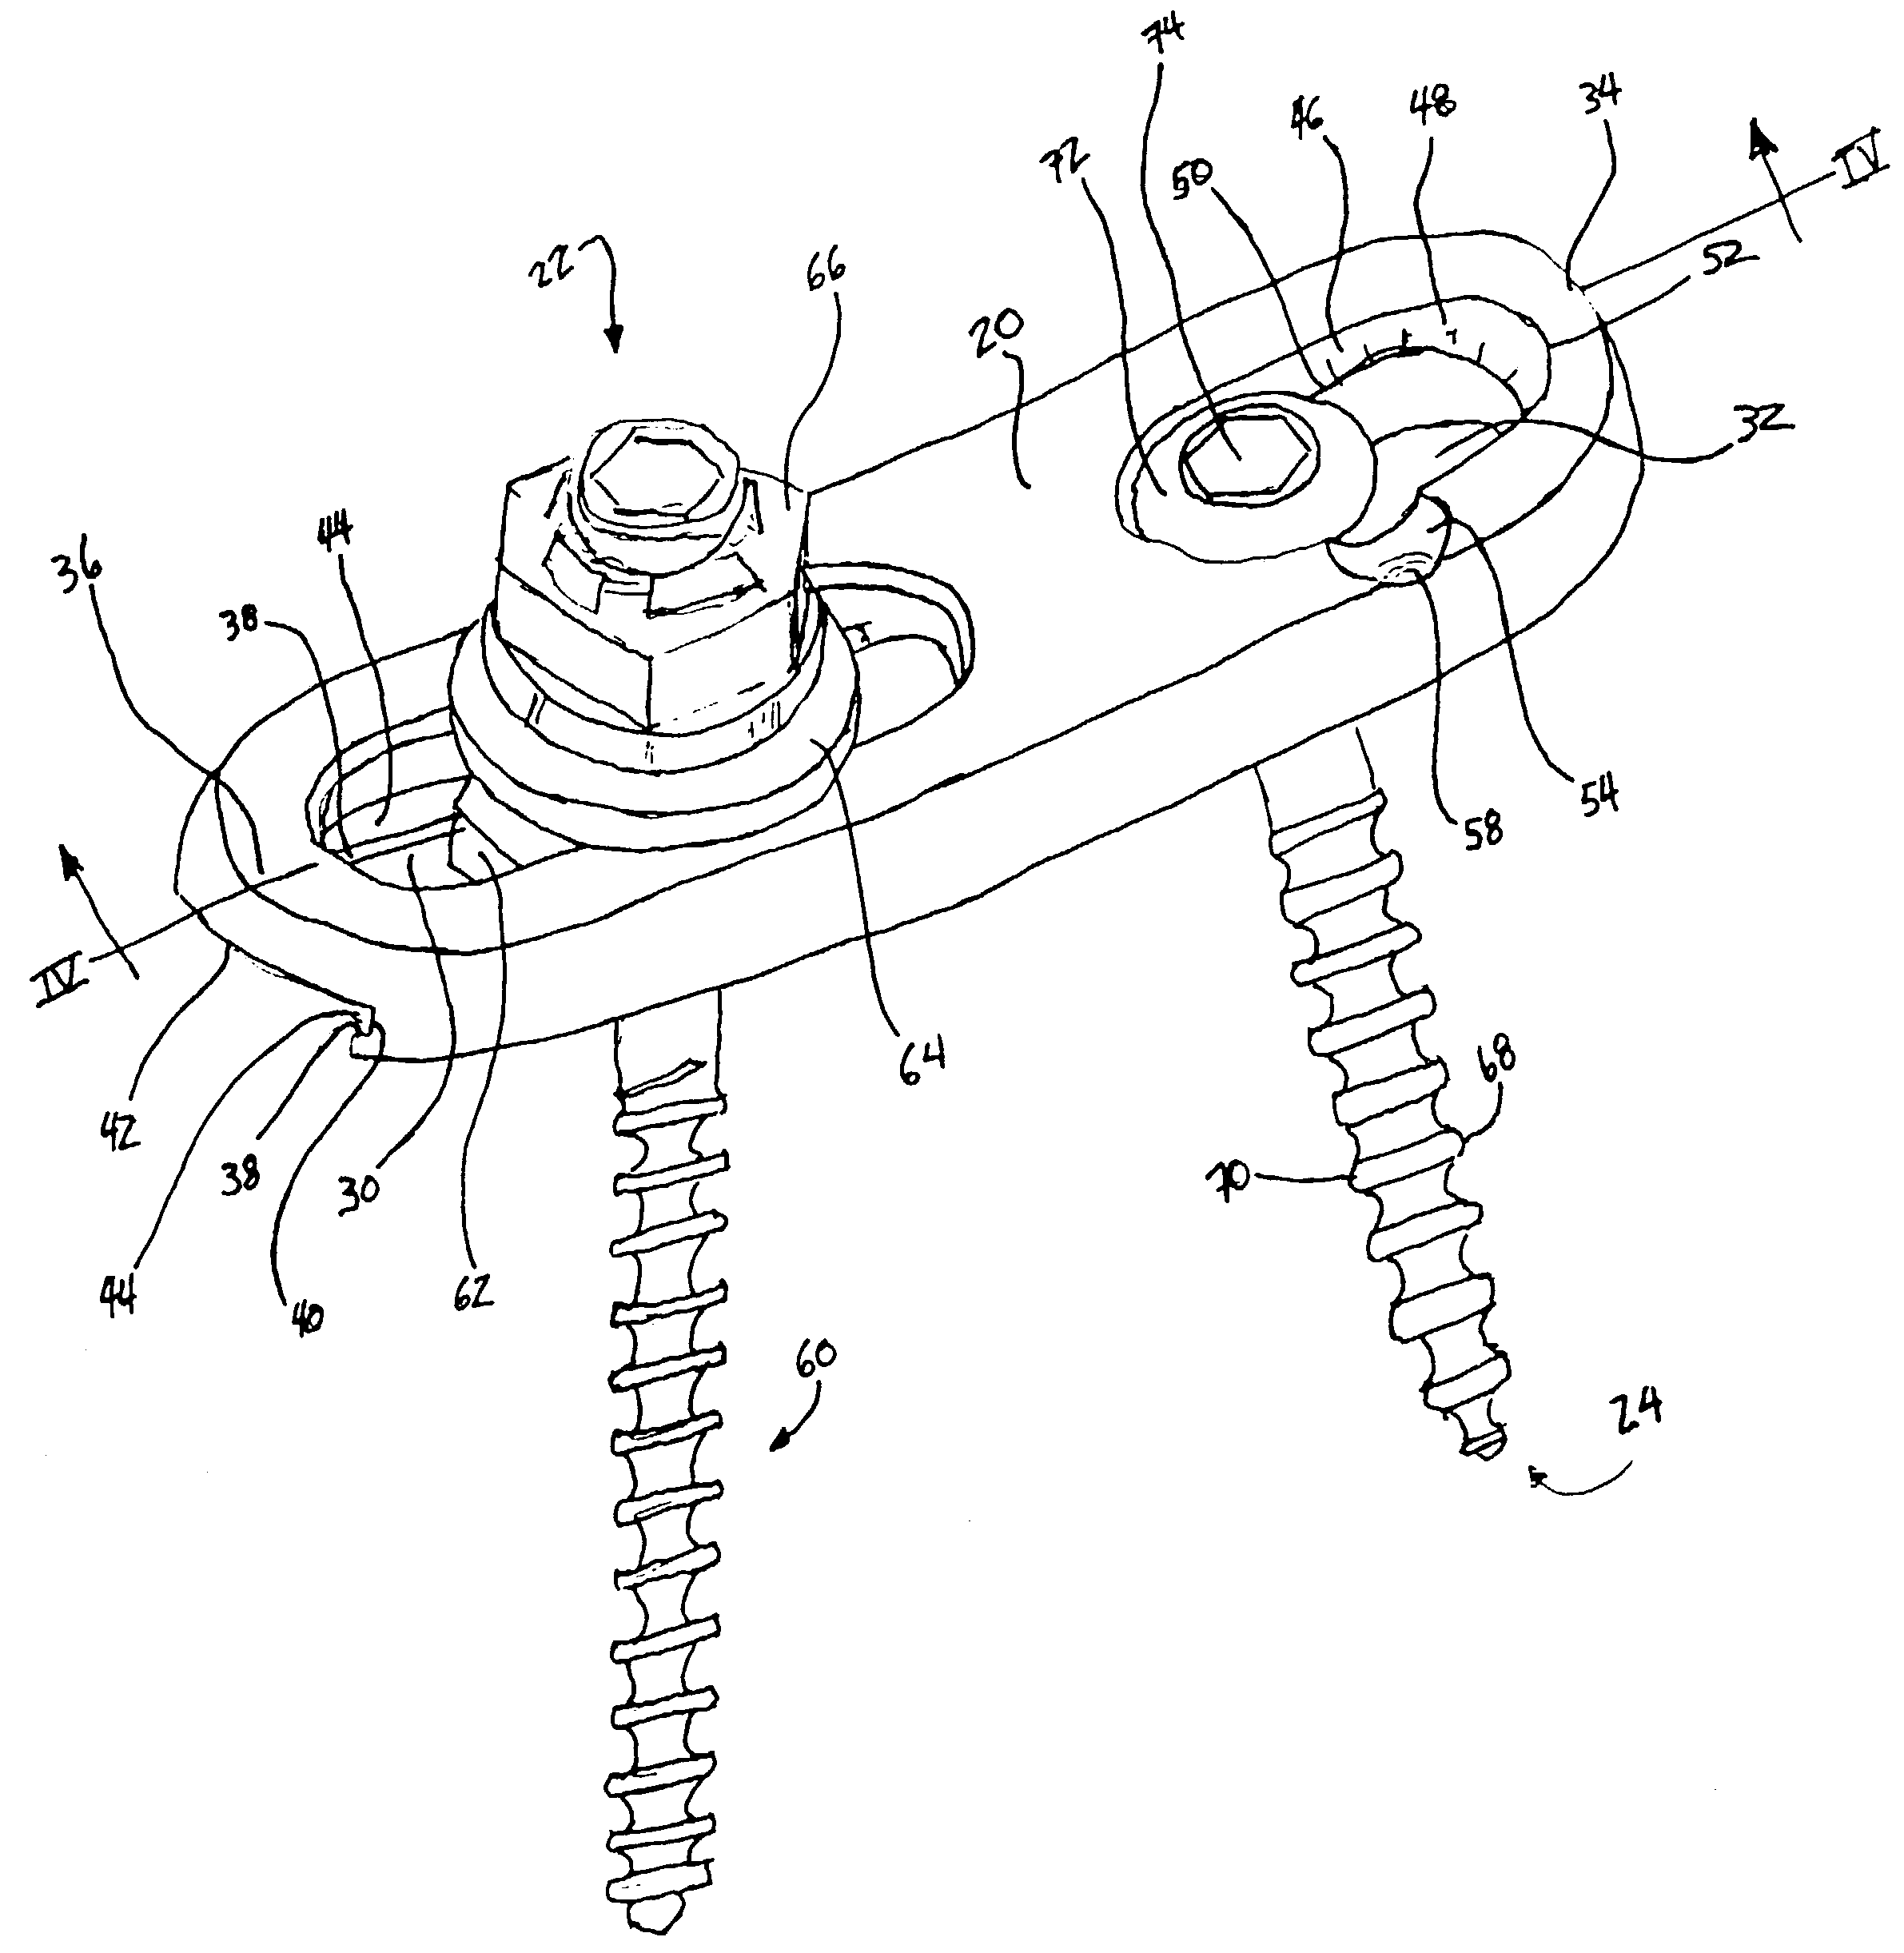 Posterior pedicle screw and plate system and methods